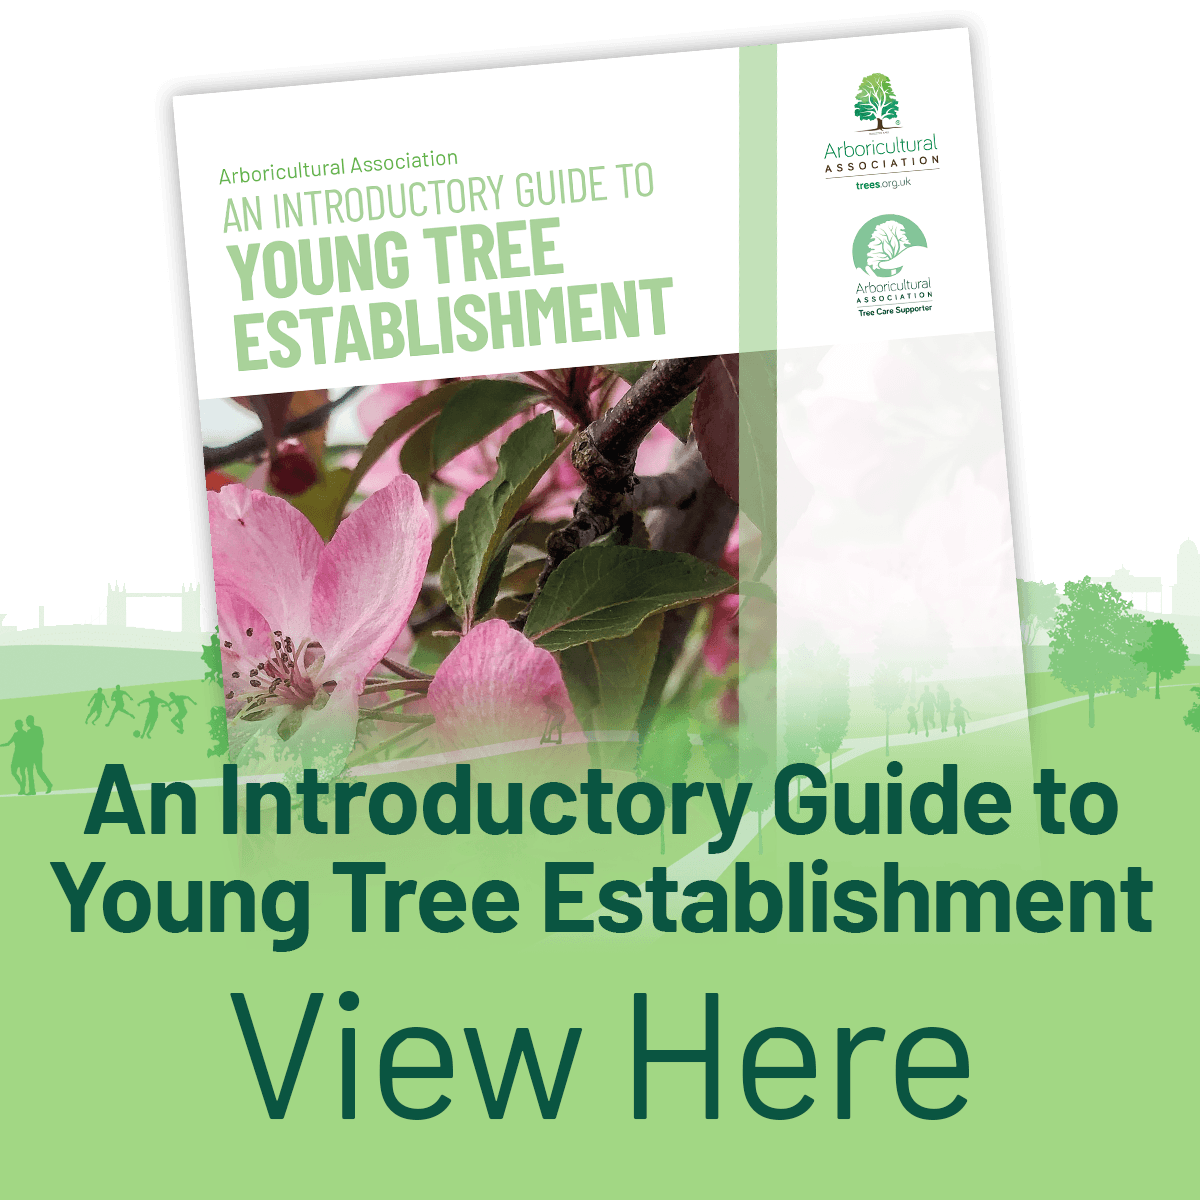 View the Introductory Guide to Young Tree Establishment Sieries